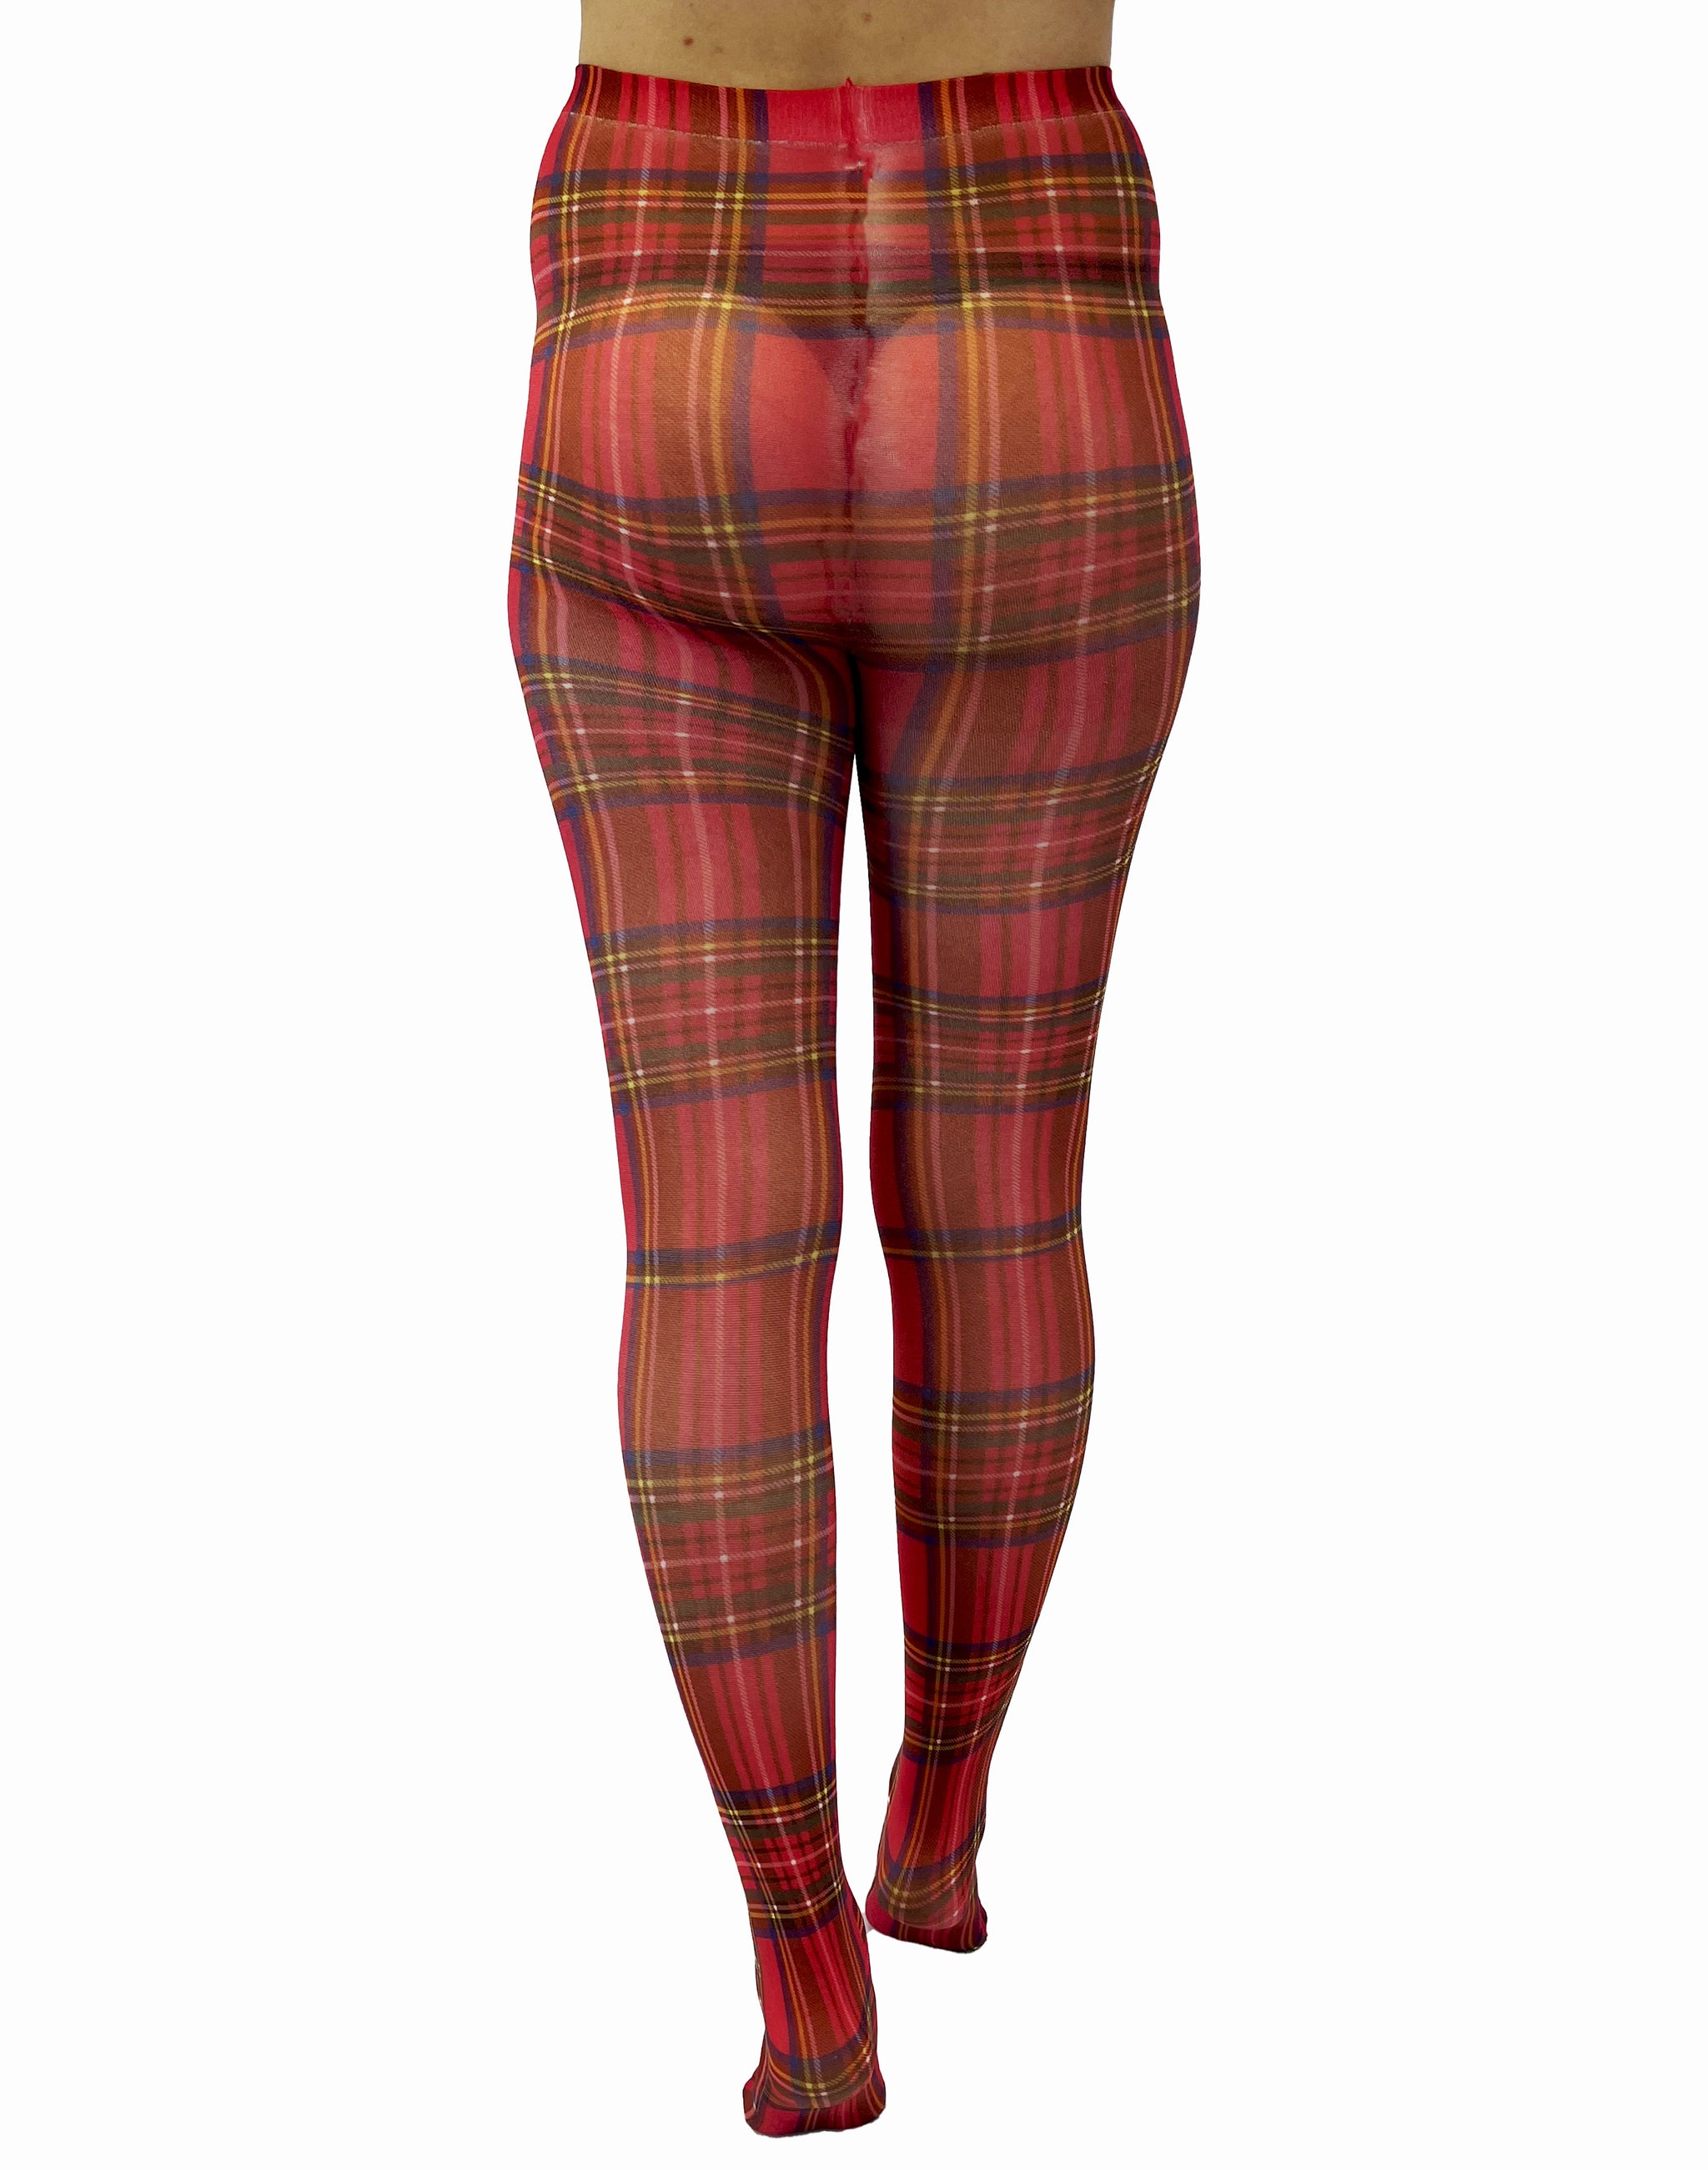 Plaid Footless Tights Teal Printed Pantyhose From Ankle to Waist Available  in Plus Size 